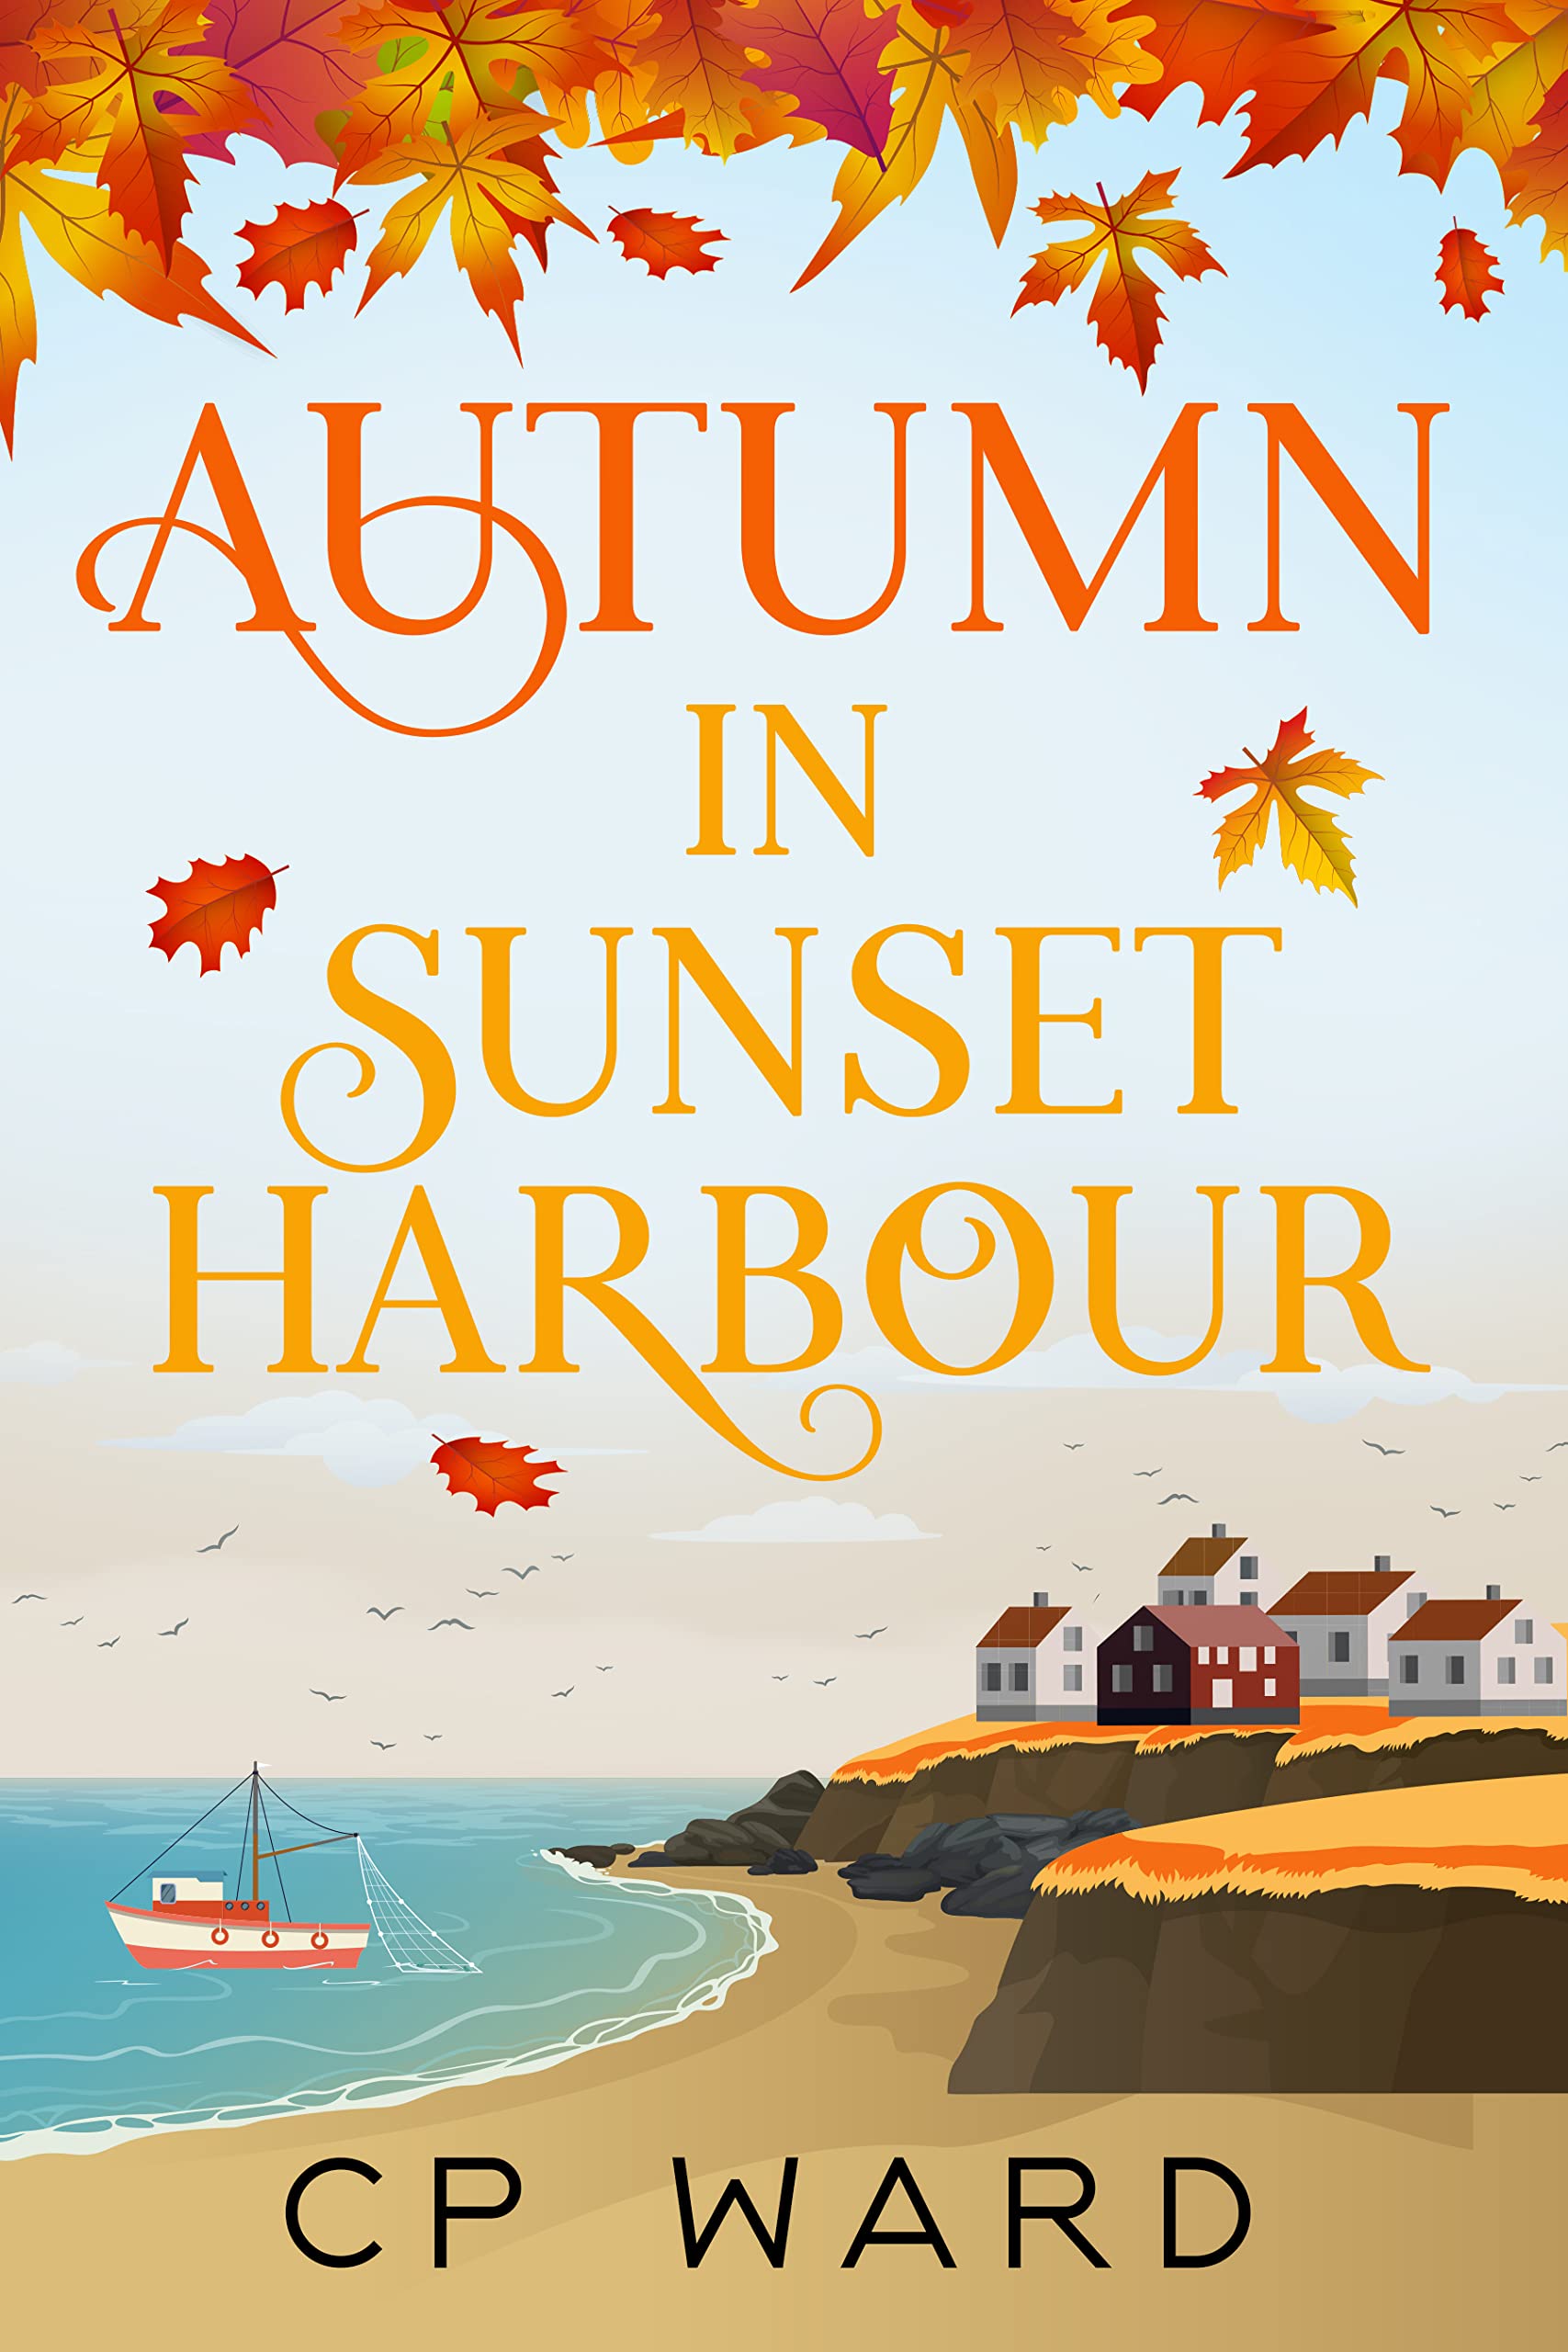 Autumn in Sunset Harbour by CP Ward